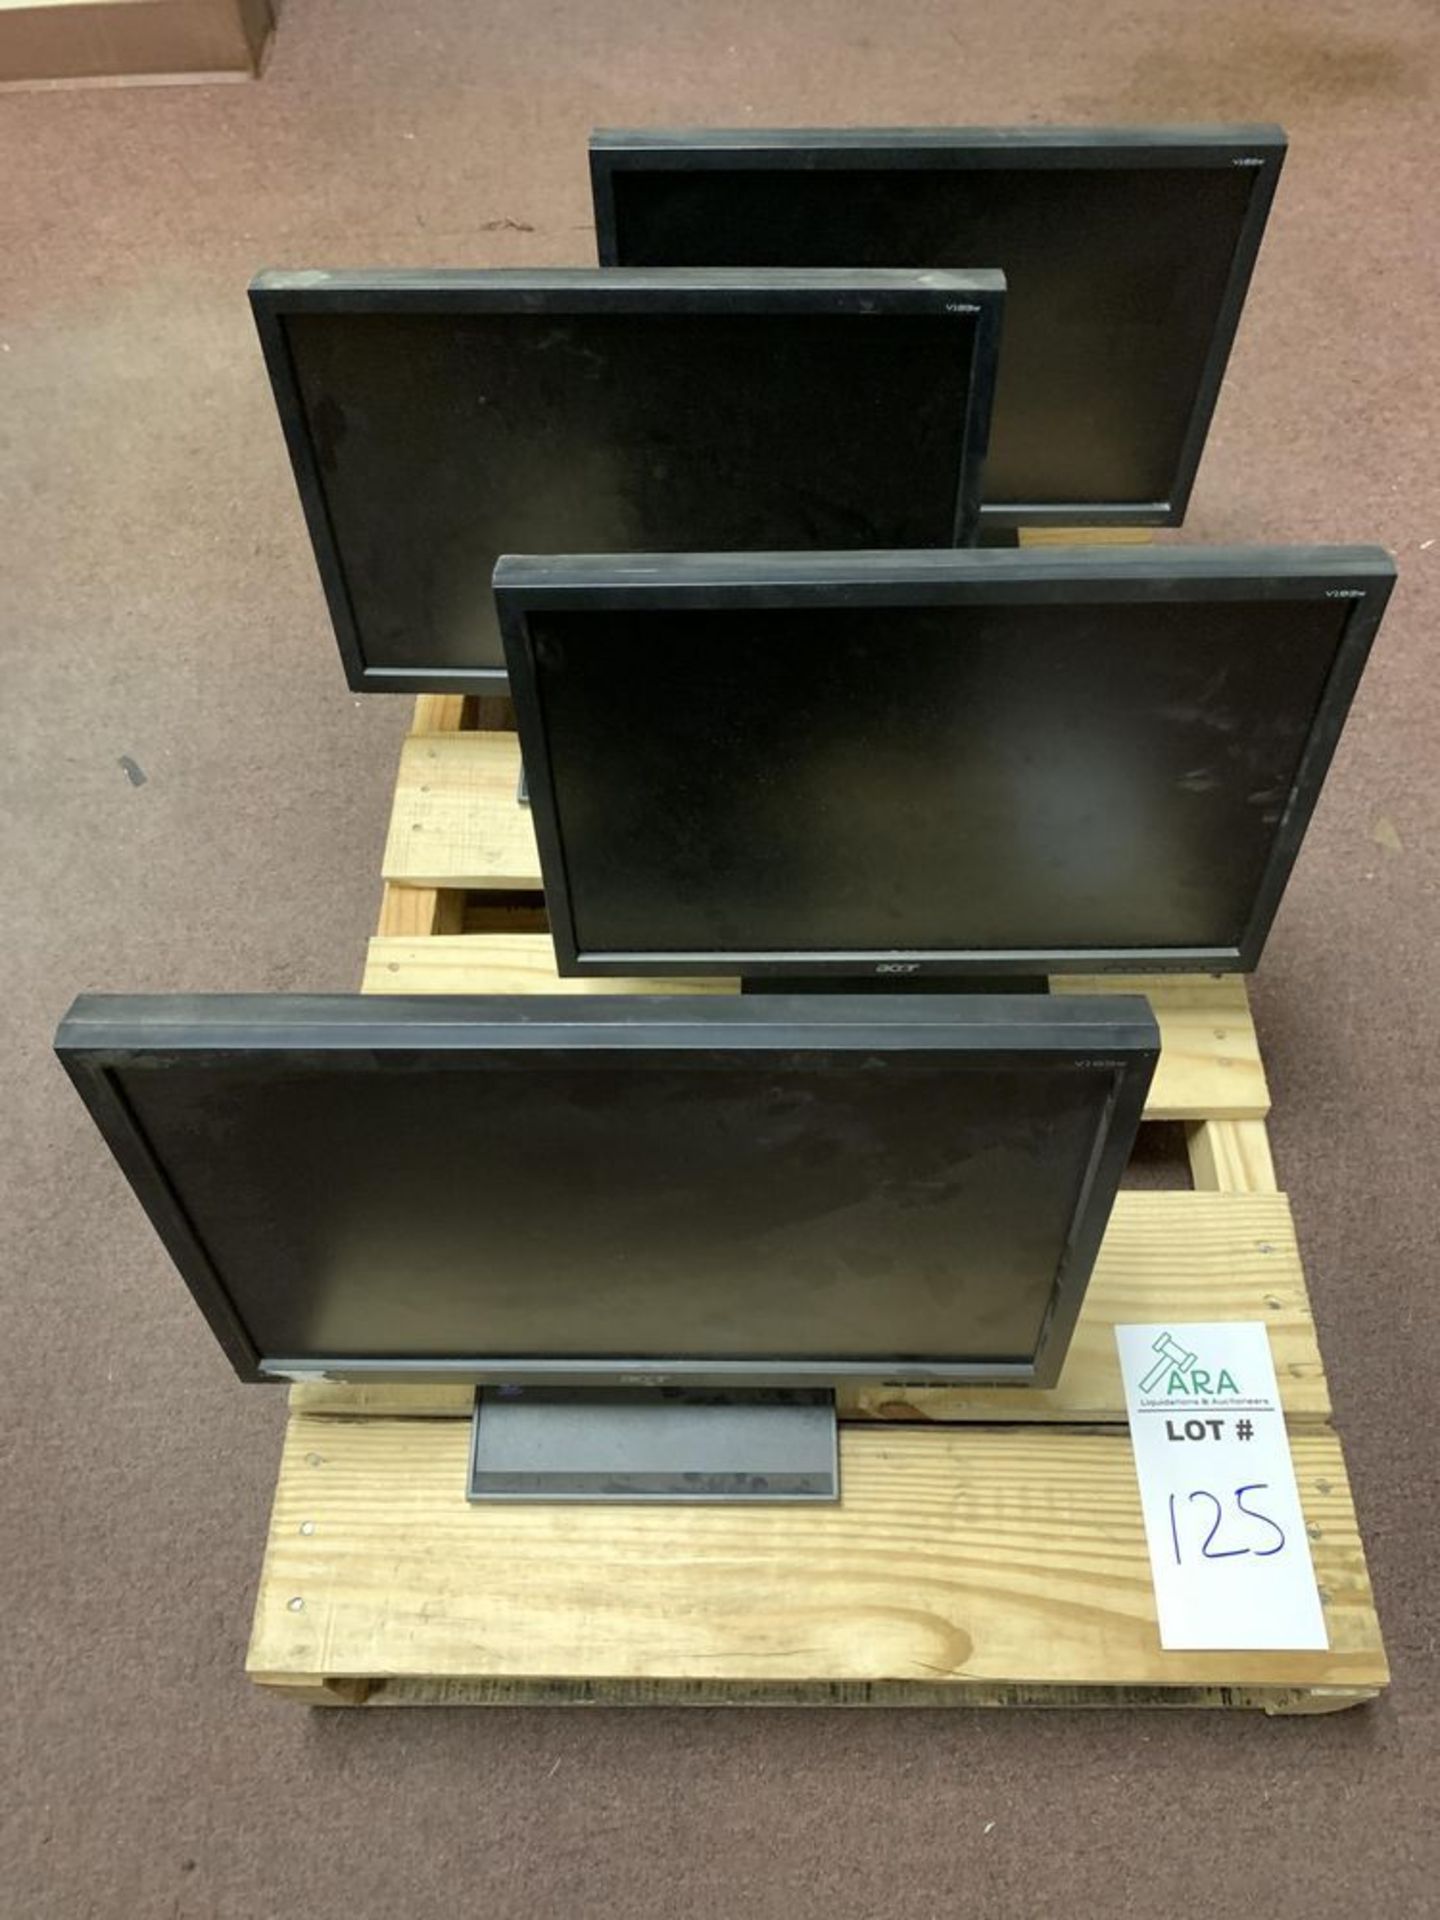 4 ACER V193W COMPUTER MONITORS. ALL ITEMS ARE SOLD AS IS UNTESTED BUT CAME FROM A WORKING